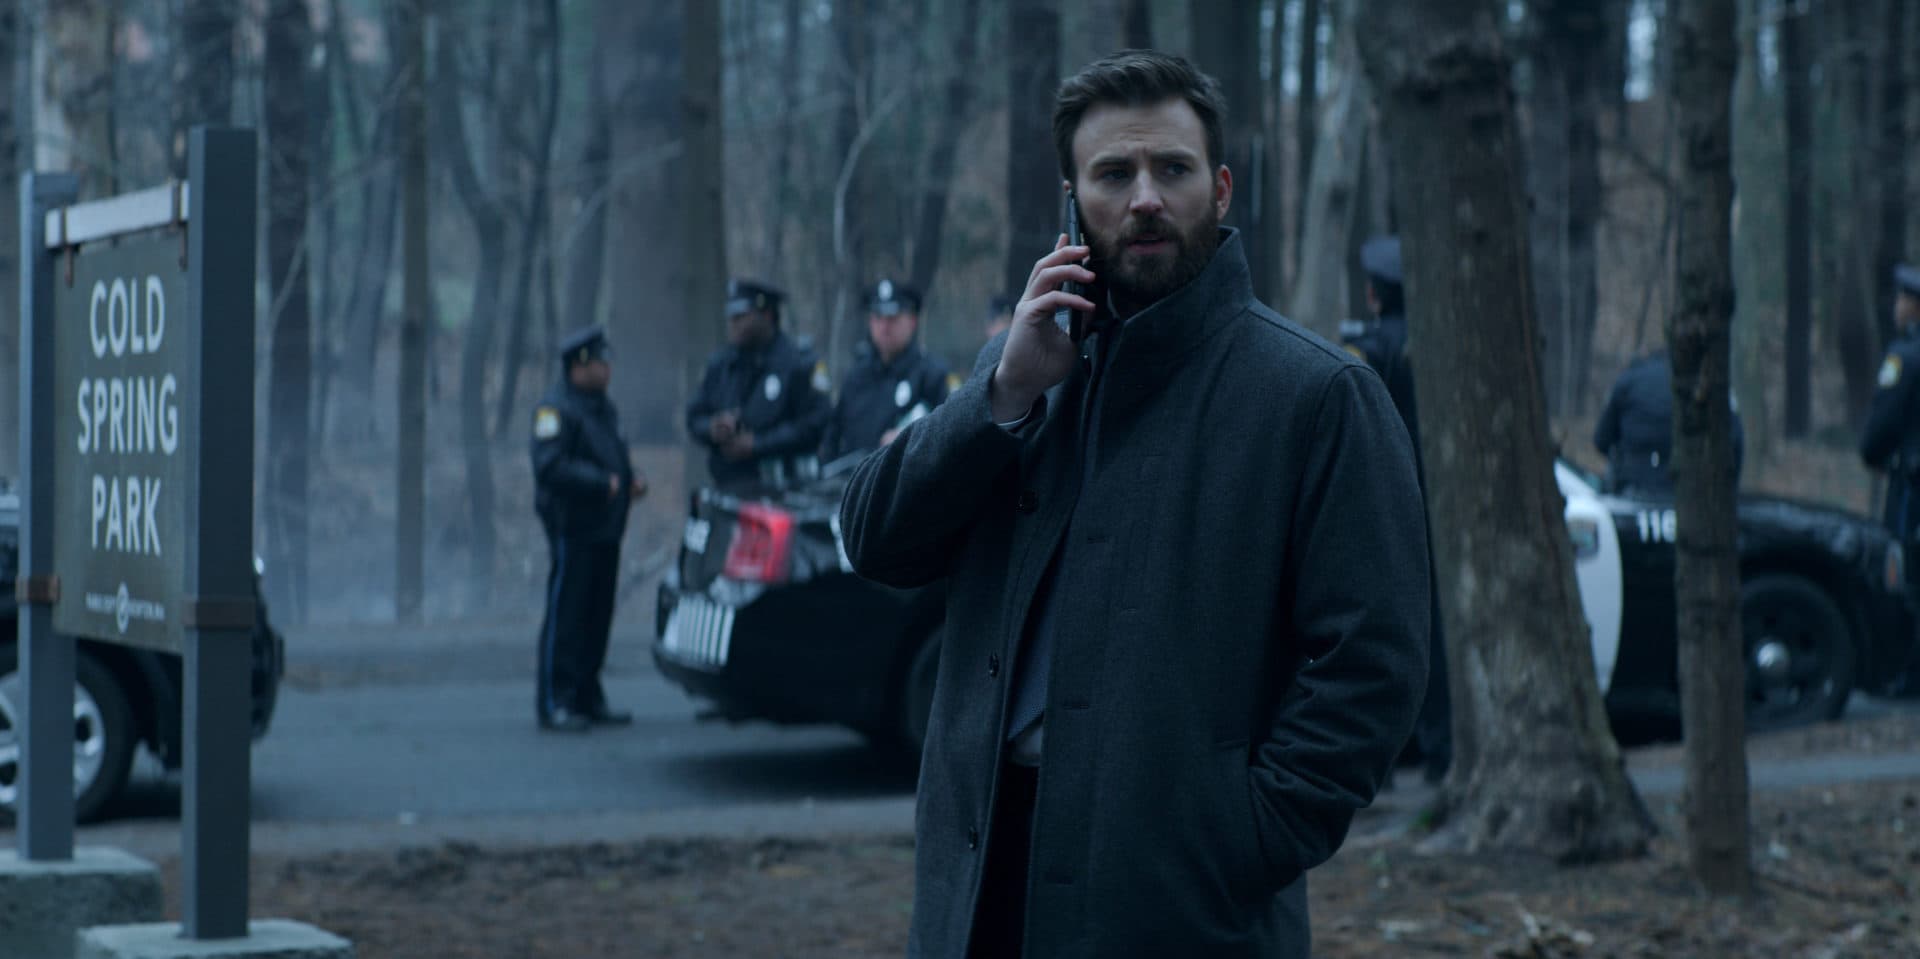 The show &quot;Defending Jacob&quot; was filmed on location in Massachusetts. Actor Chris Evans is seen standing near the sign for Cold Spring Park in Newton in a still from episode two. (Courtesy Apple TV+)